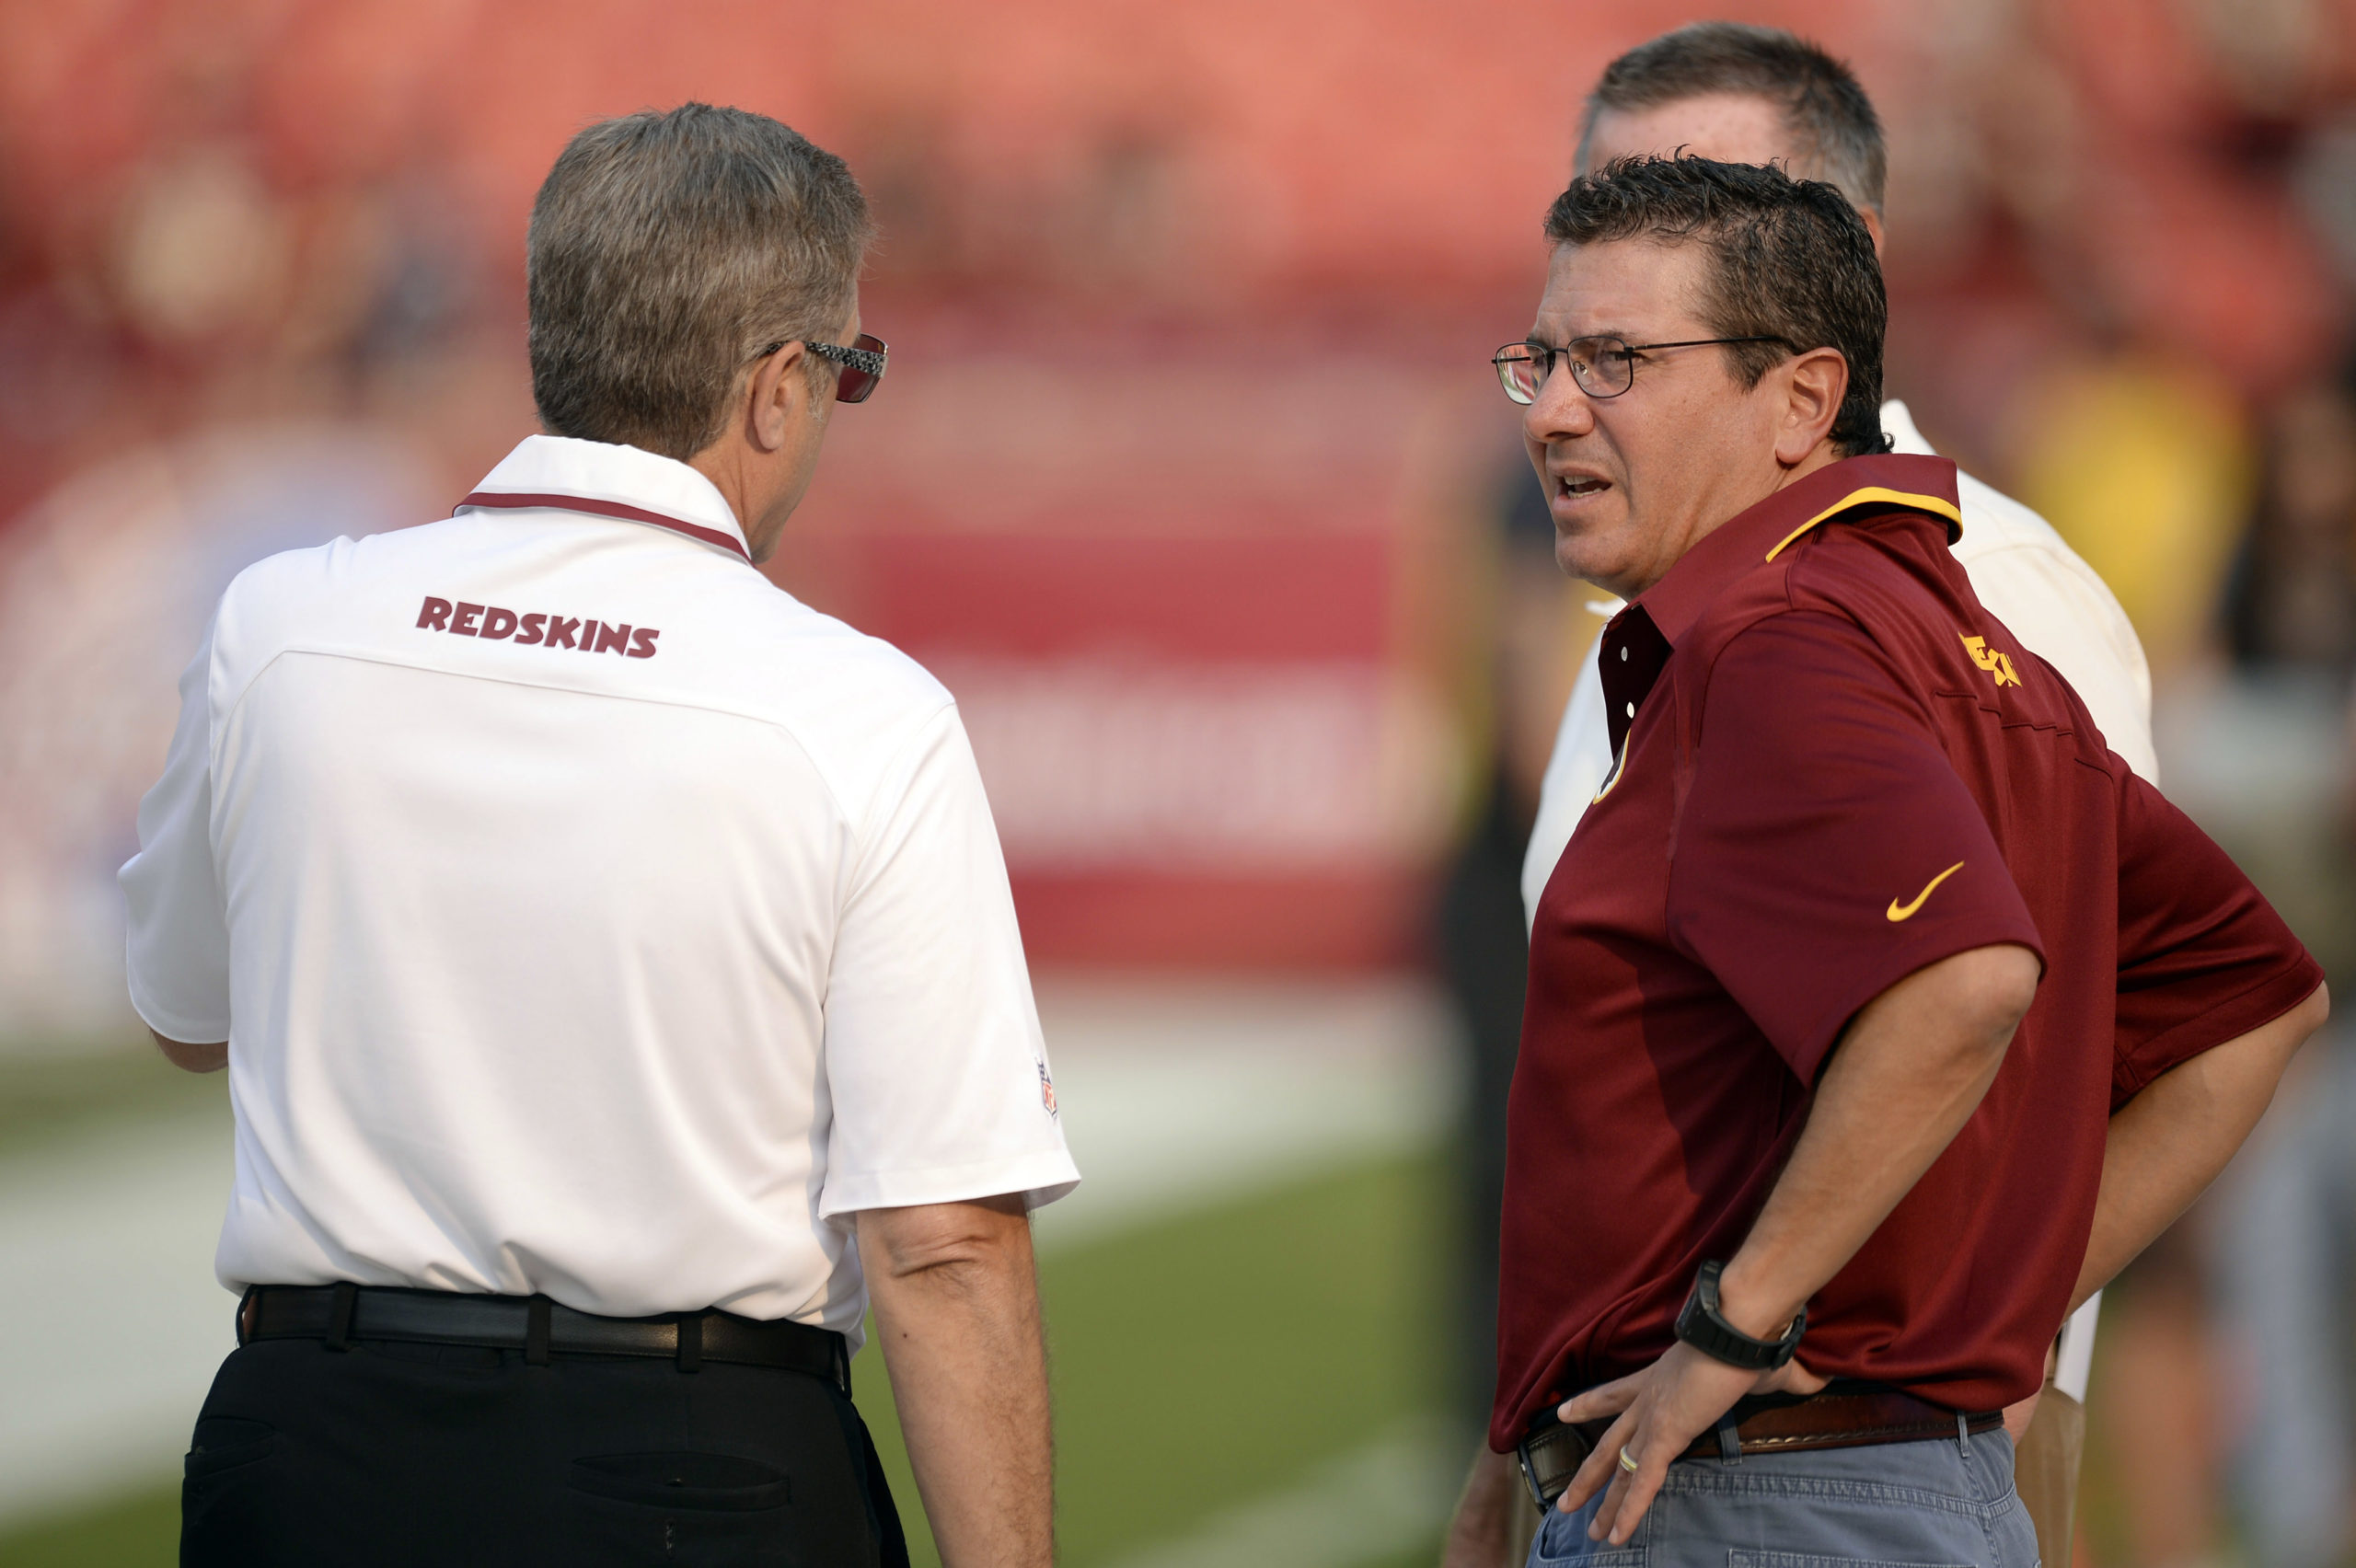 Dan Snyder Hires Bank of America to Sell Washington Commanders